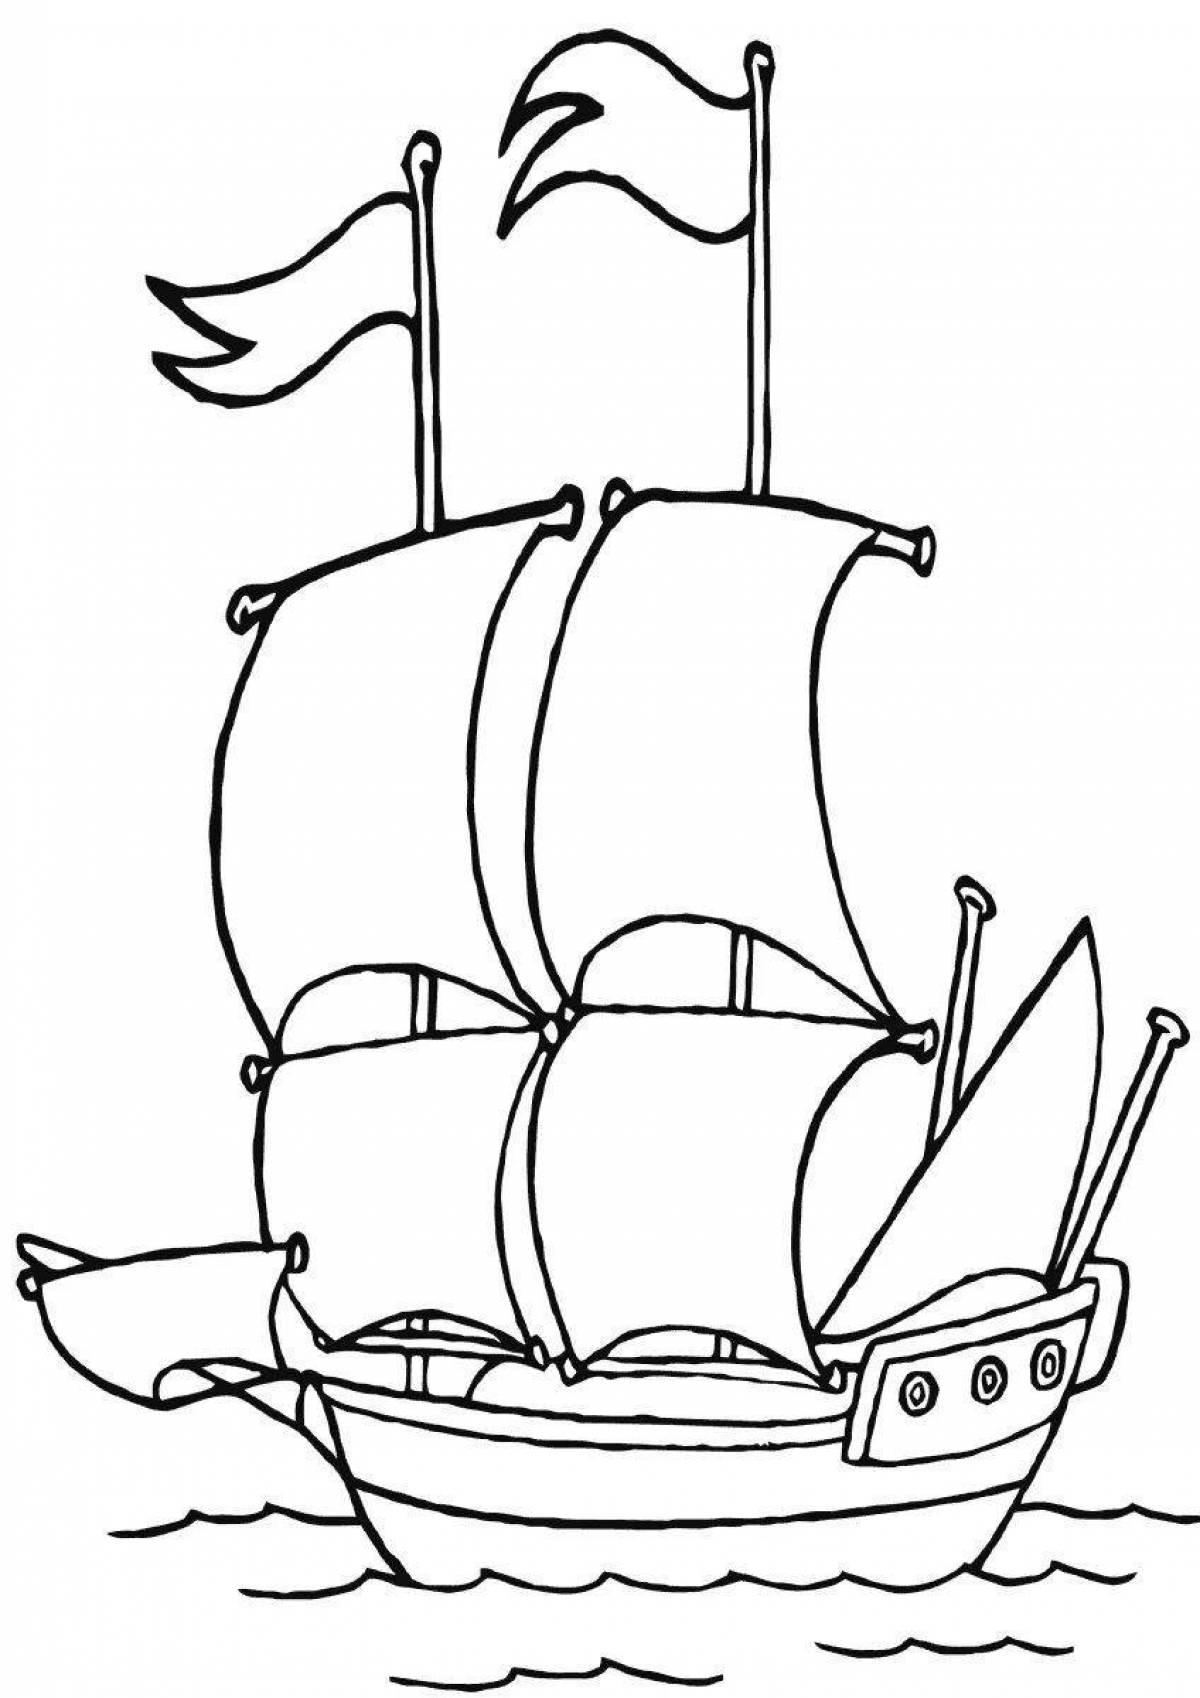 Ship with sails #9